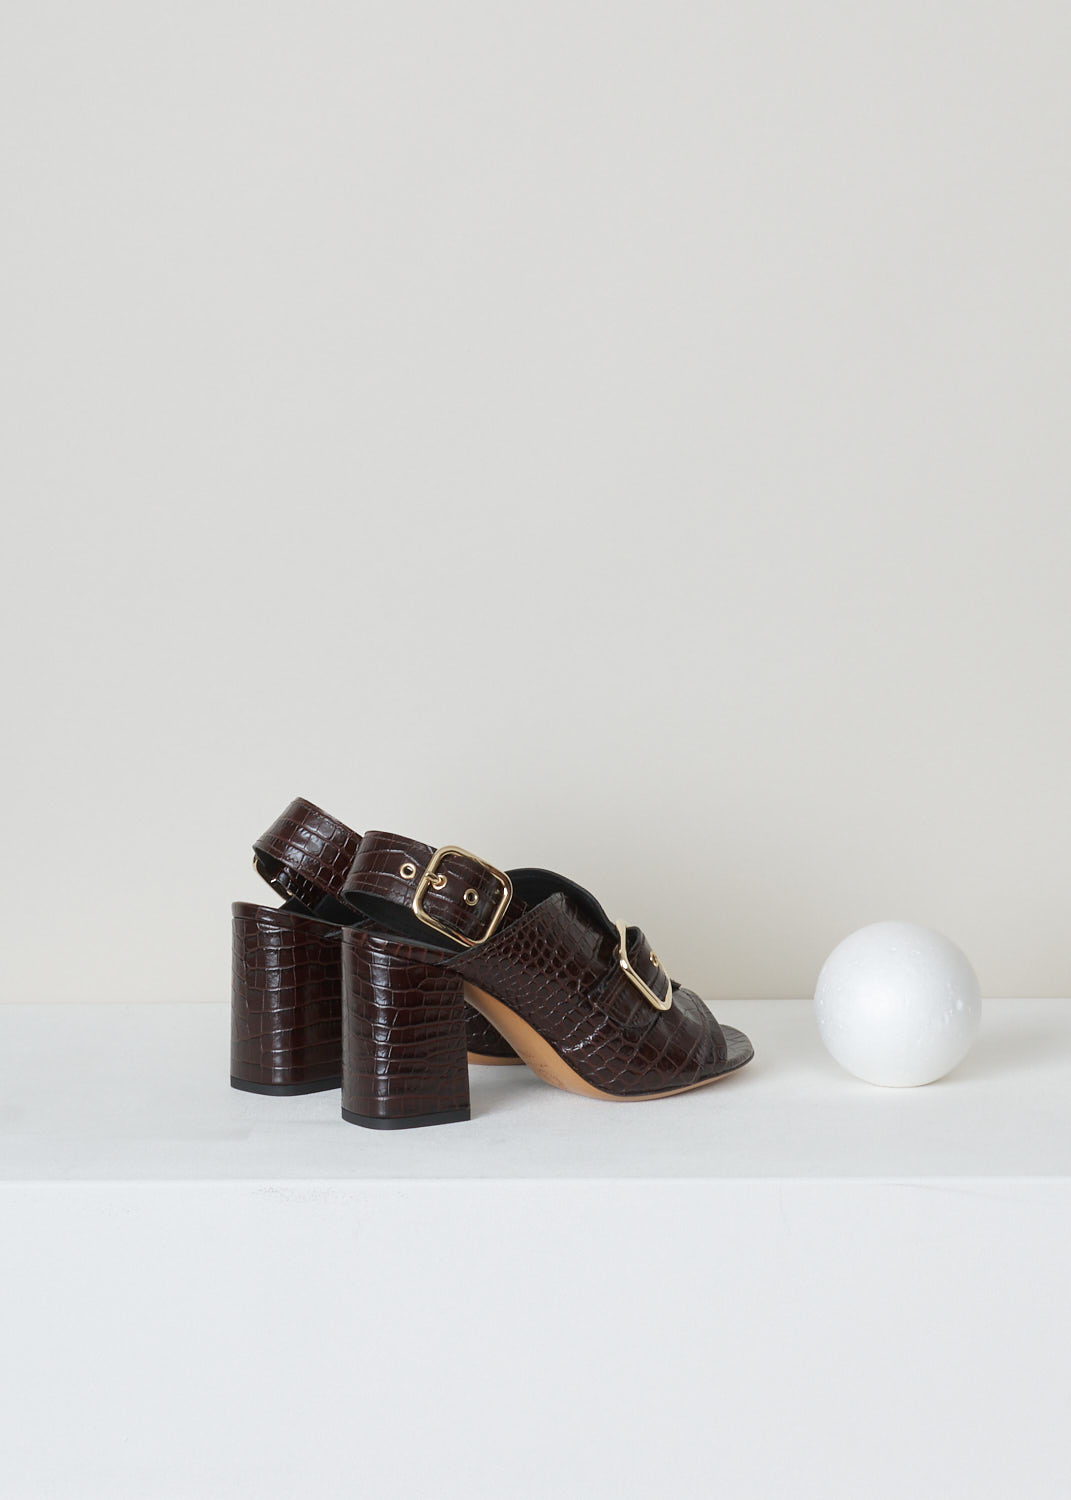 Dries van Noten, Brown embossed crocodile sandals, WS25_139_80_QU107_DBROWN704, brown, back, These brown crocodile embossed sandals are made from patent leather. They feature a round open toe chunky heel, heel straps and gold-tone metal buckles. 